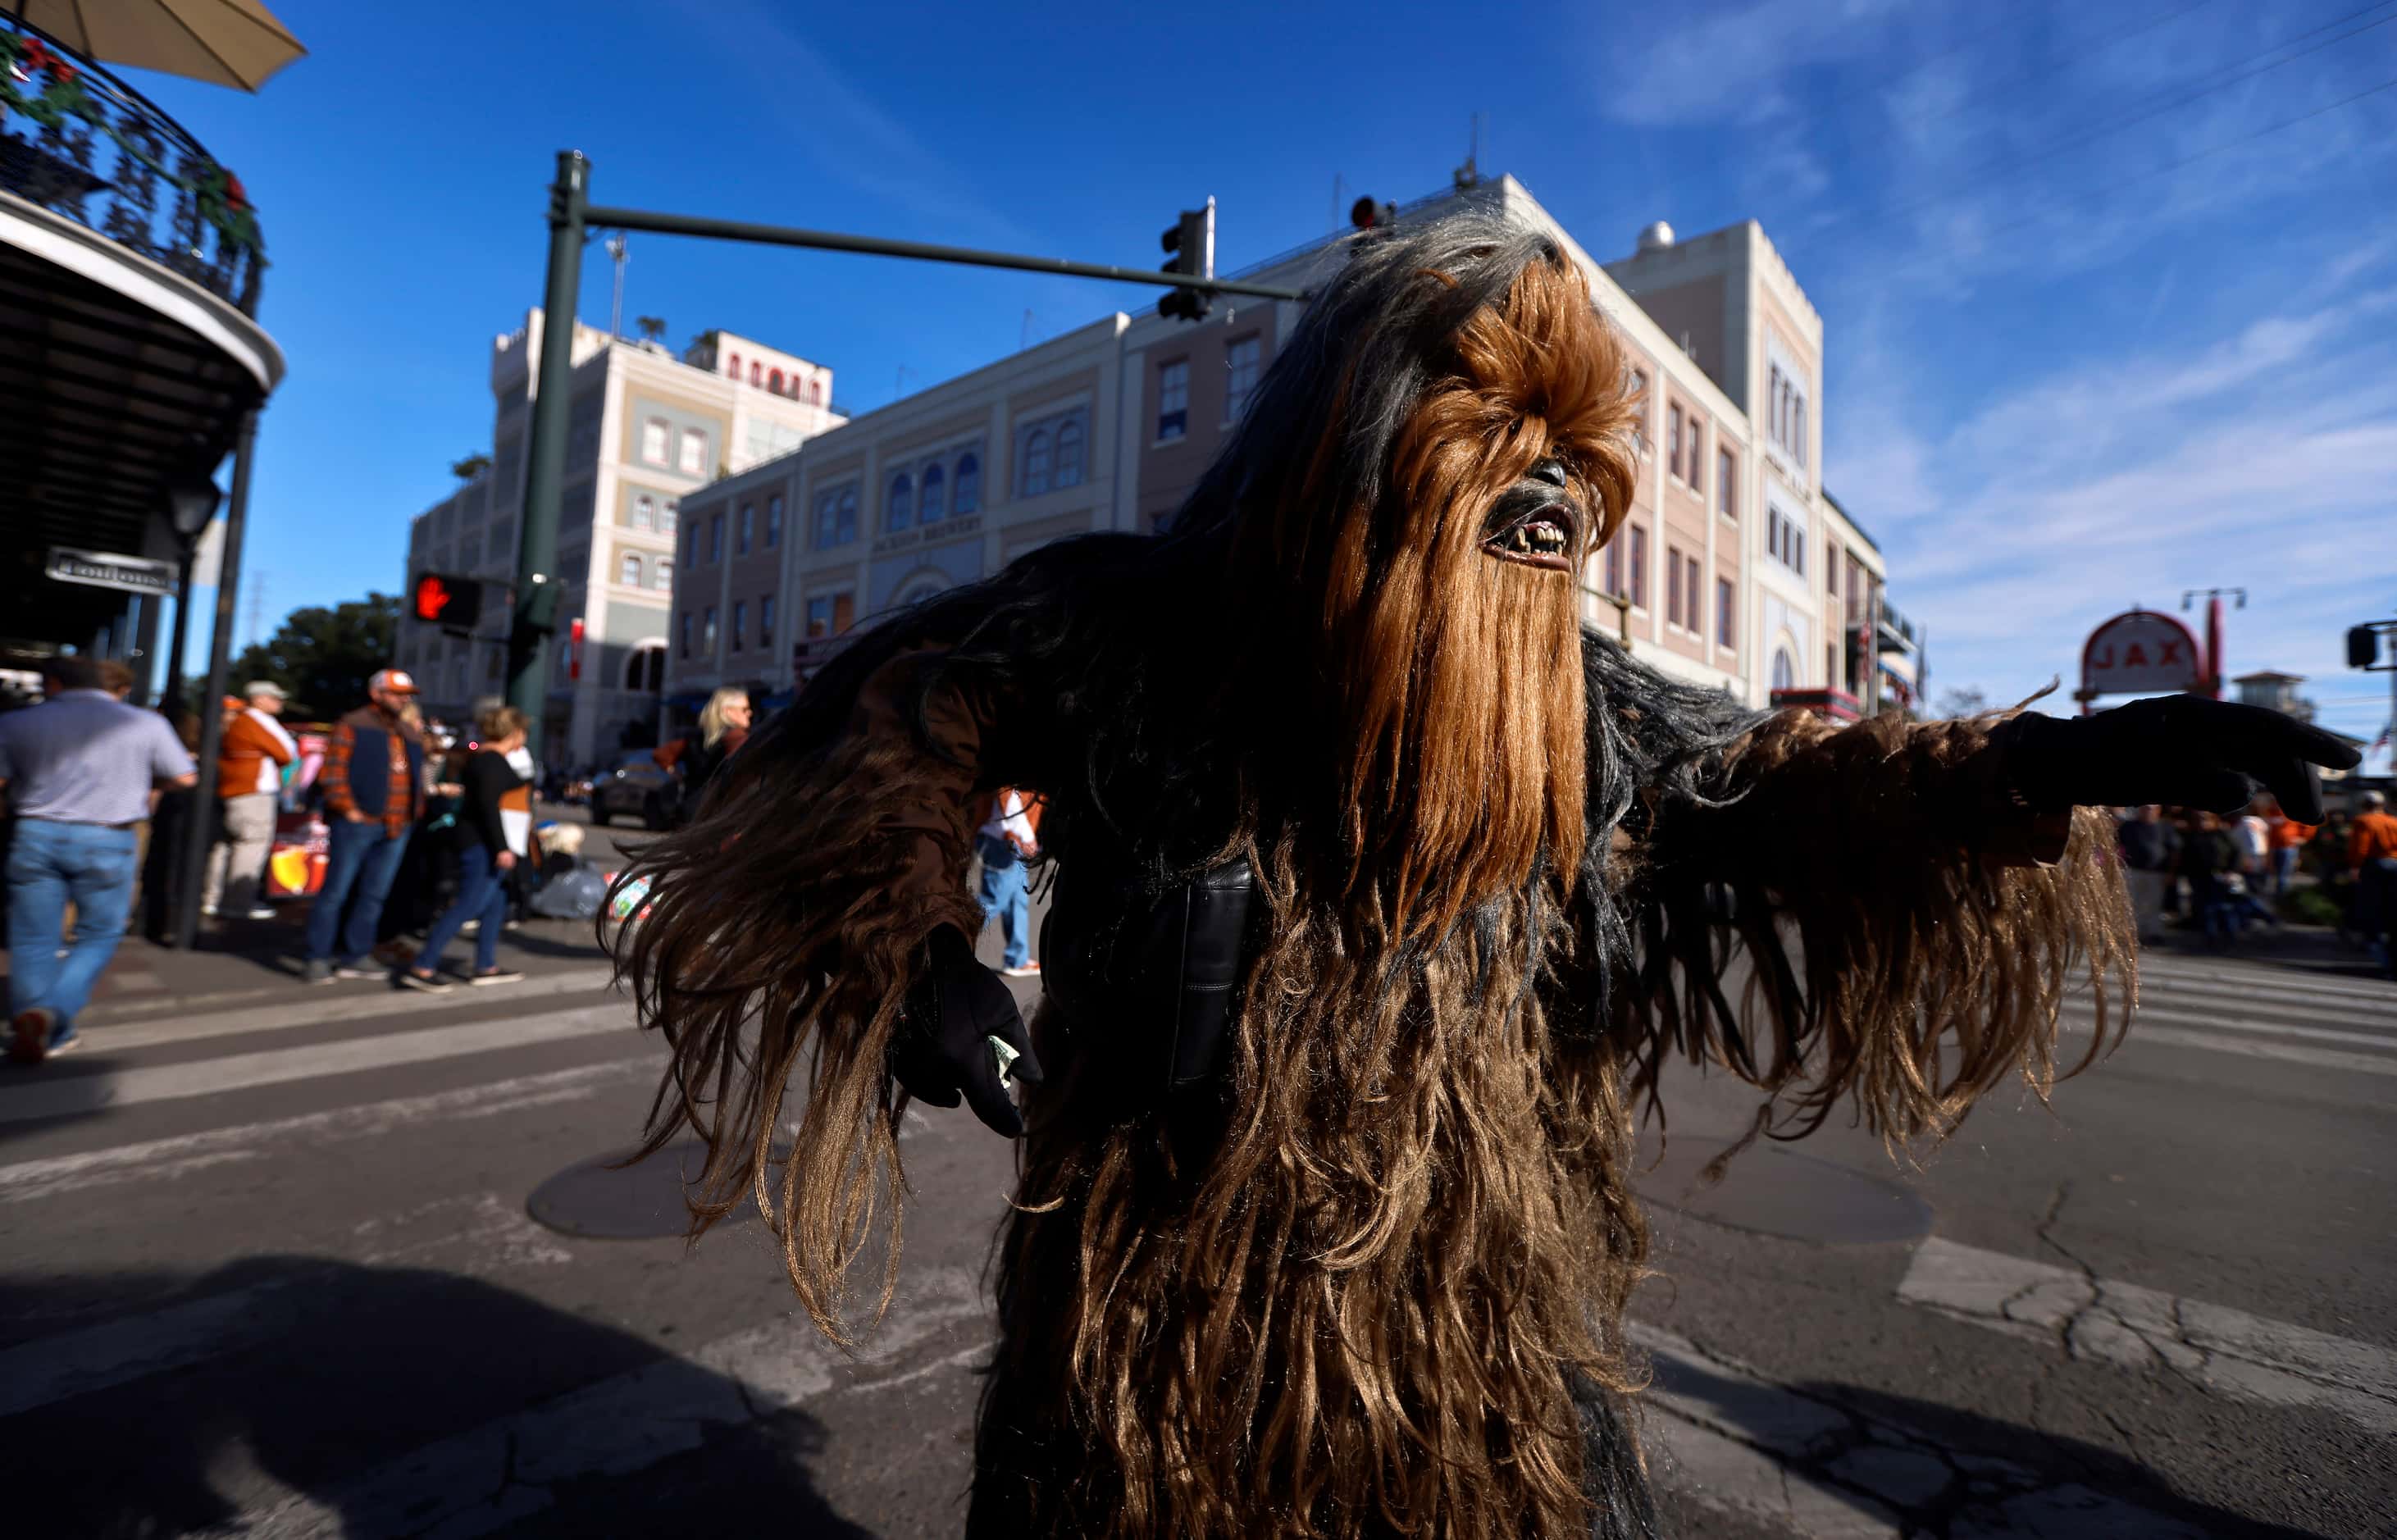 A person dressed as Chewbacca from Star Wars greets people to the Mardi Gras-style Allstate...